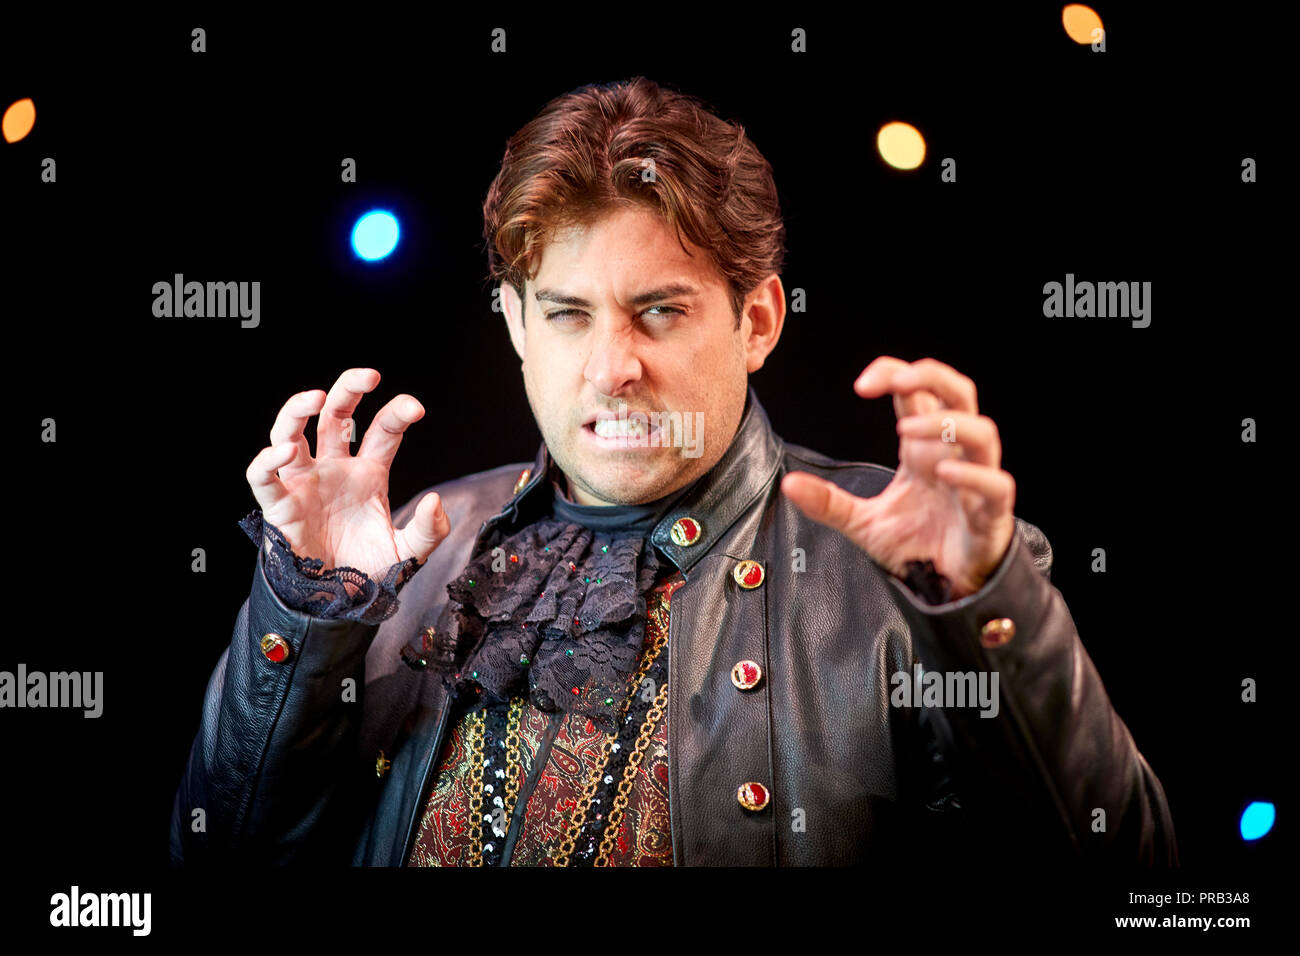 Greater Manchester, UK 1st Oct 2018. James Argent from The Only Way Is Essex stars in Aladdin at Middleton Arena in Greater Manchester Credit: Mark Waugh/Alamy Live News Stock Photo